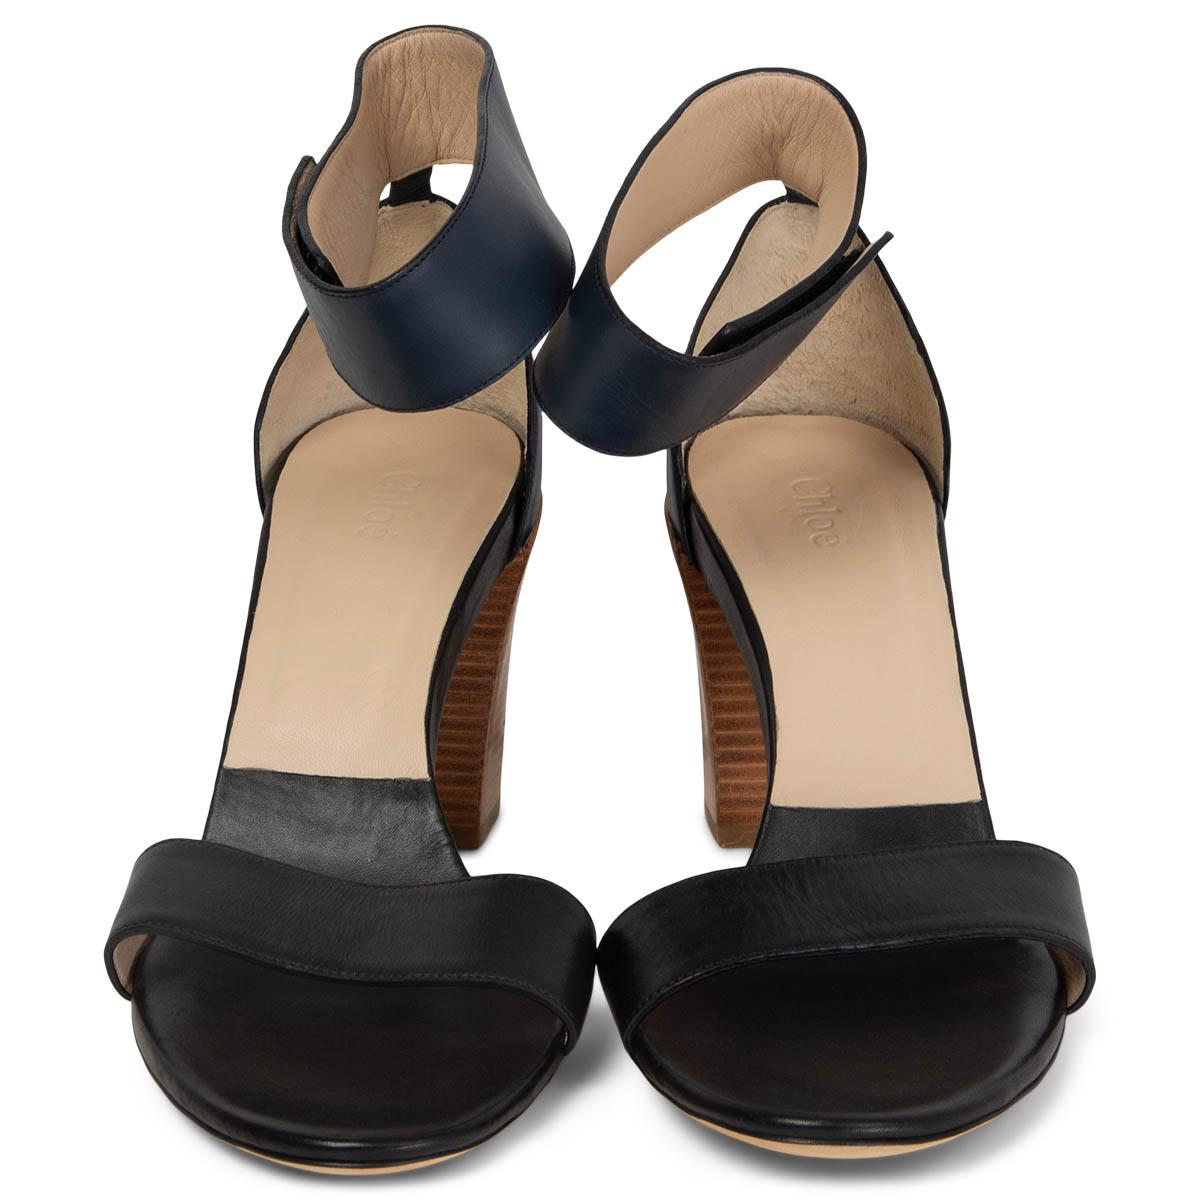 100% authentic Chloé two-tone ankle-strap sandals in seawater (navy blue) and black leather. Opens with a velcro ankle strap. Brand new. 

Measurements
Imprinted Size	42
Shoe Size	42
Inside Sole	27.5cm (10.7in)
Width	8.5cm (3.3in)
Heel	8.5cm